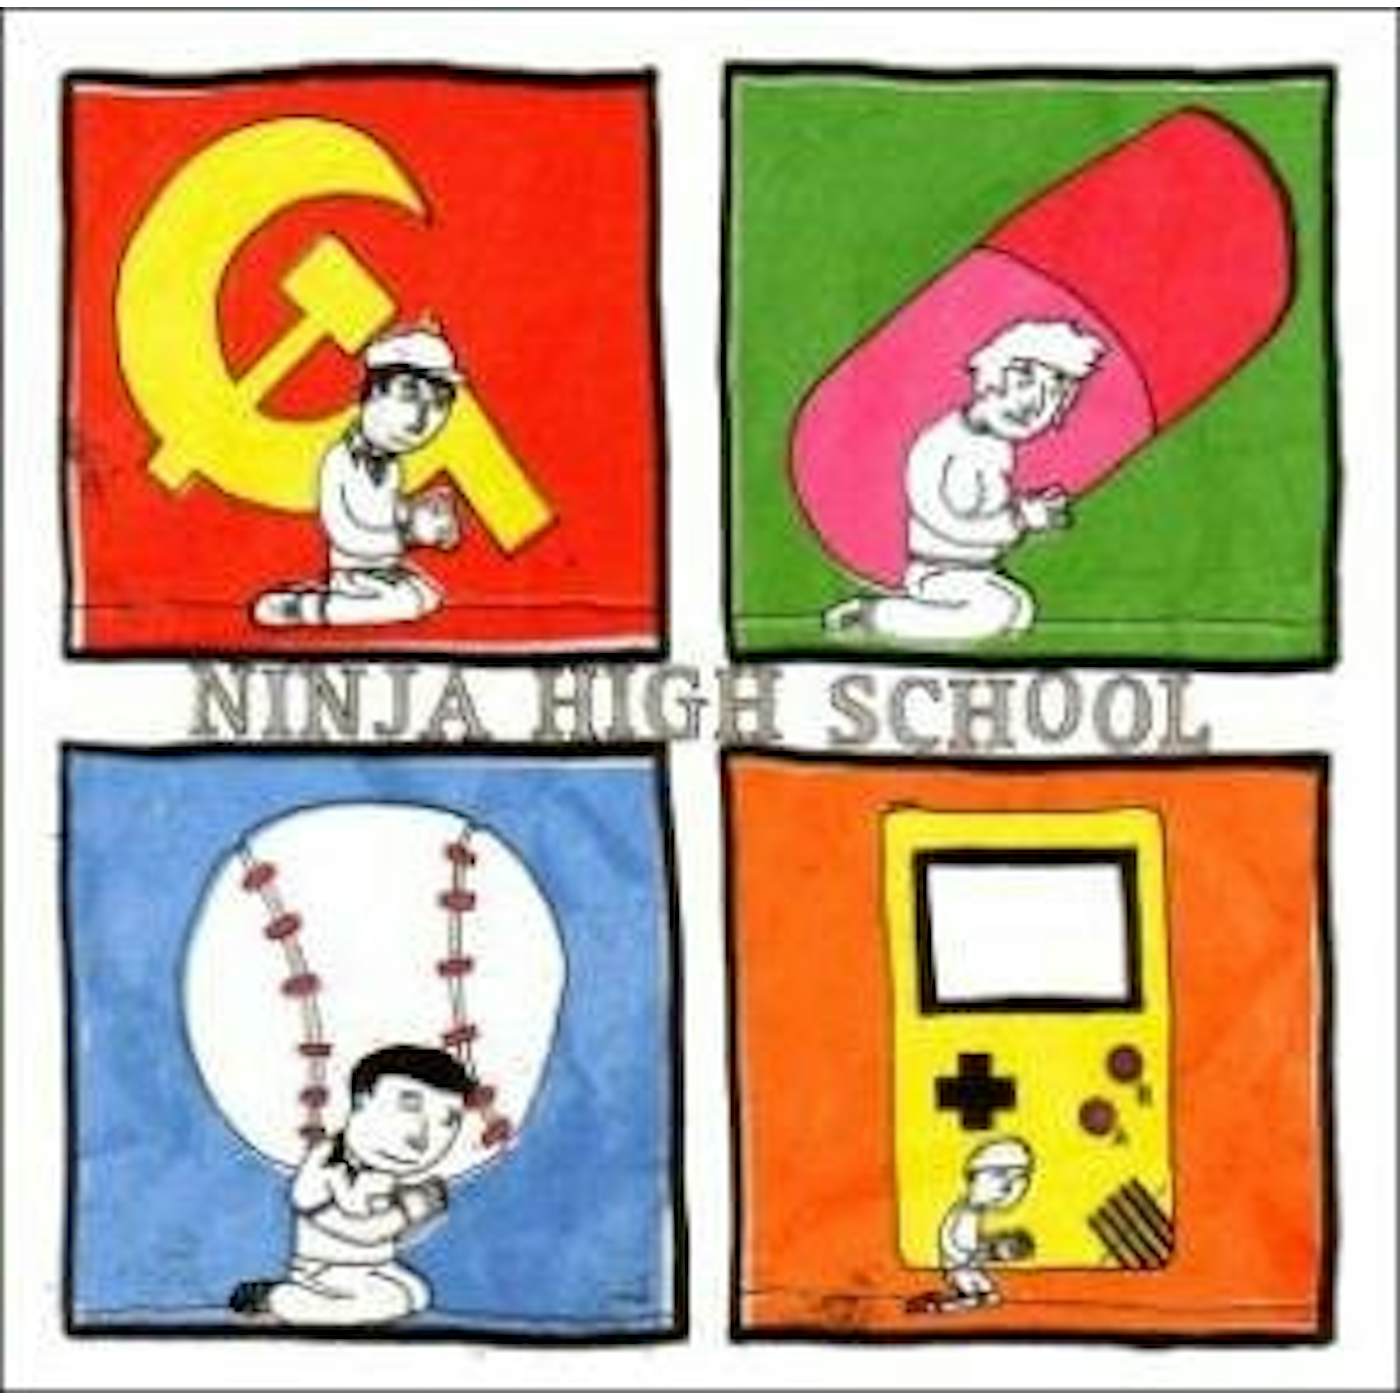 Ninja High School YOUNG ADULTS AGAINST SUICIDE CD